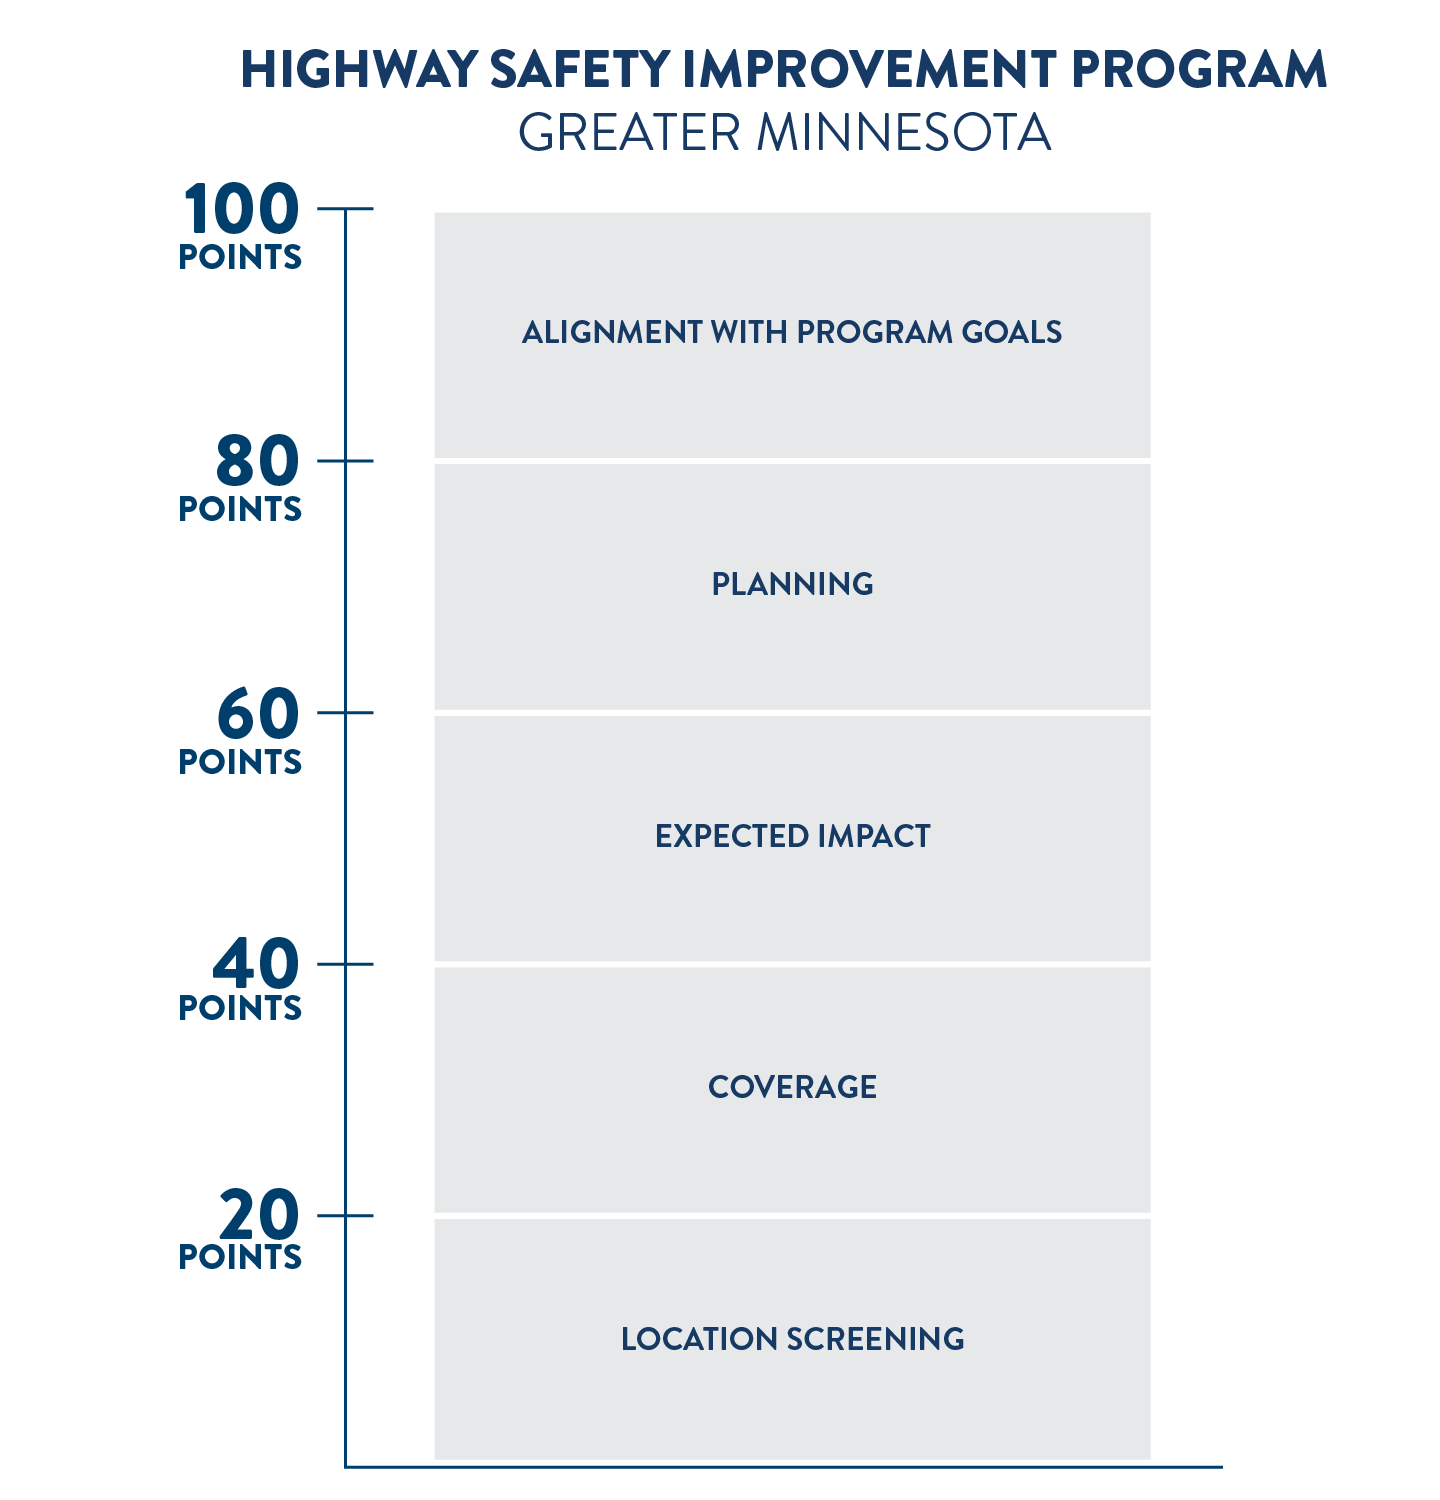 Scoring criteria for the Highway Safety Improvement Program in Greater Minnesota. A total of 100 points is available spread equally between five criteria: location screening, coverage, expected impact, planning, and alignment with program goals.